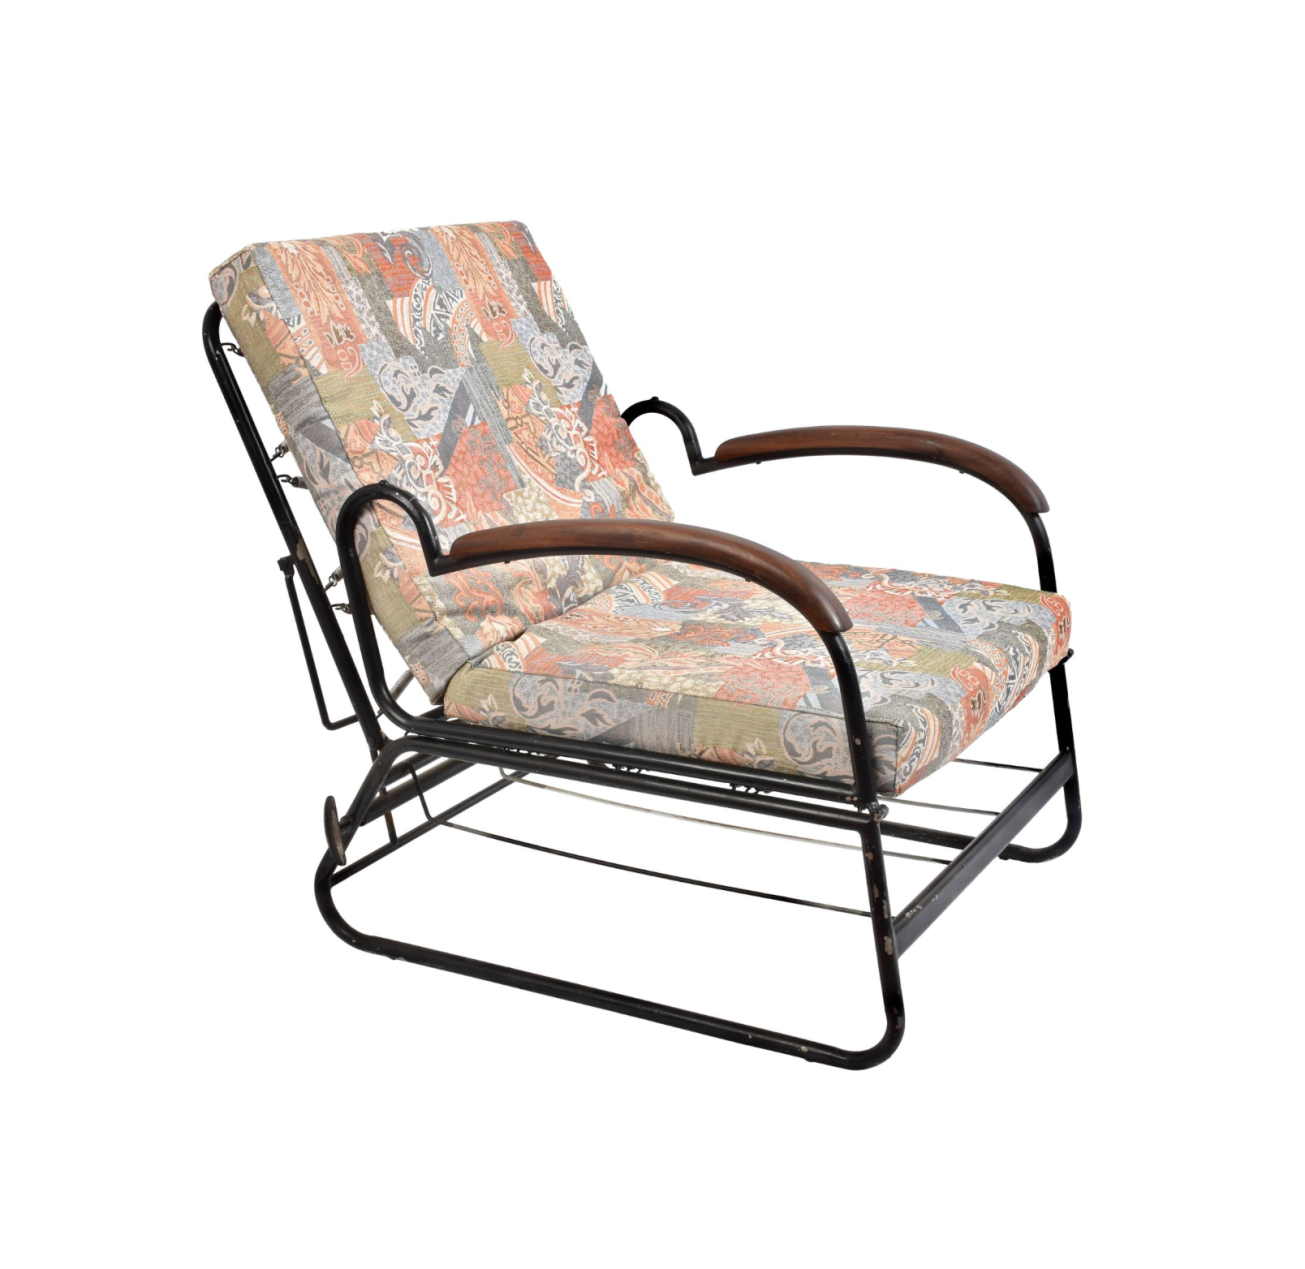 Adjustable bed armchair with Marcel Breuer style metal and wood structure. 1930s